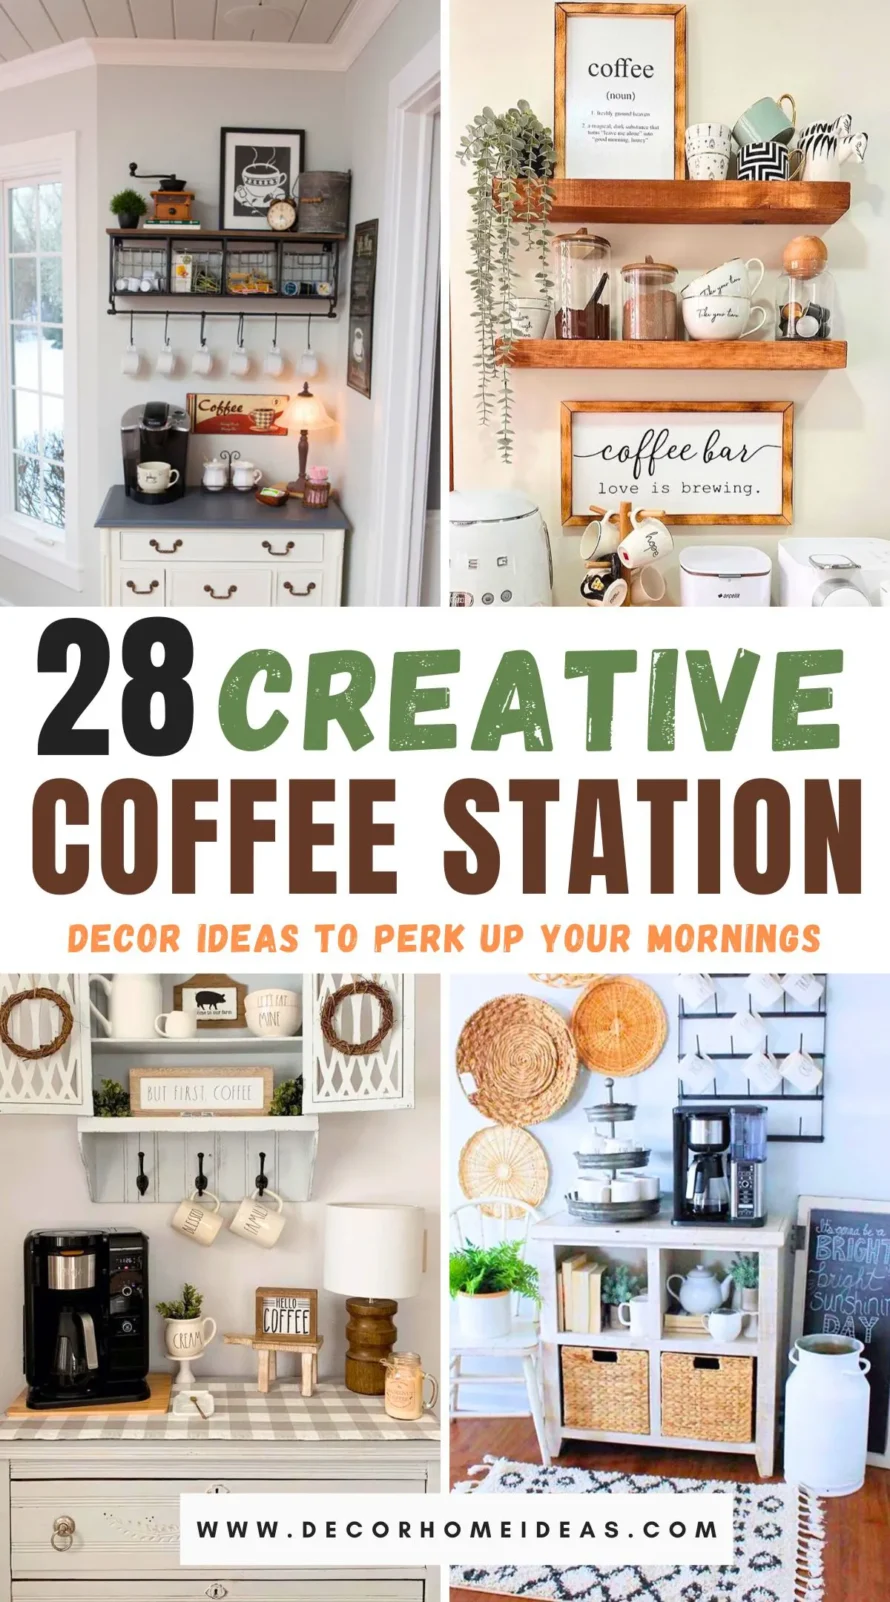 Discover 28 creative coffee station decor ideas to transform your morning routine into a stylish experience. From rustic farmhouse setups to sleek modern designs, find inspiration to personalize your coffee corner with unique accessories, storage solutions, and charming decor elements. Brew up your perfect space and make every morning delightful!